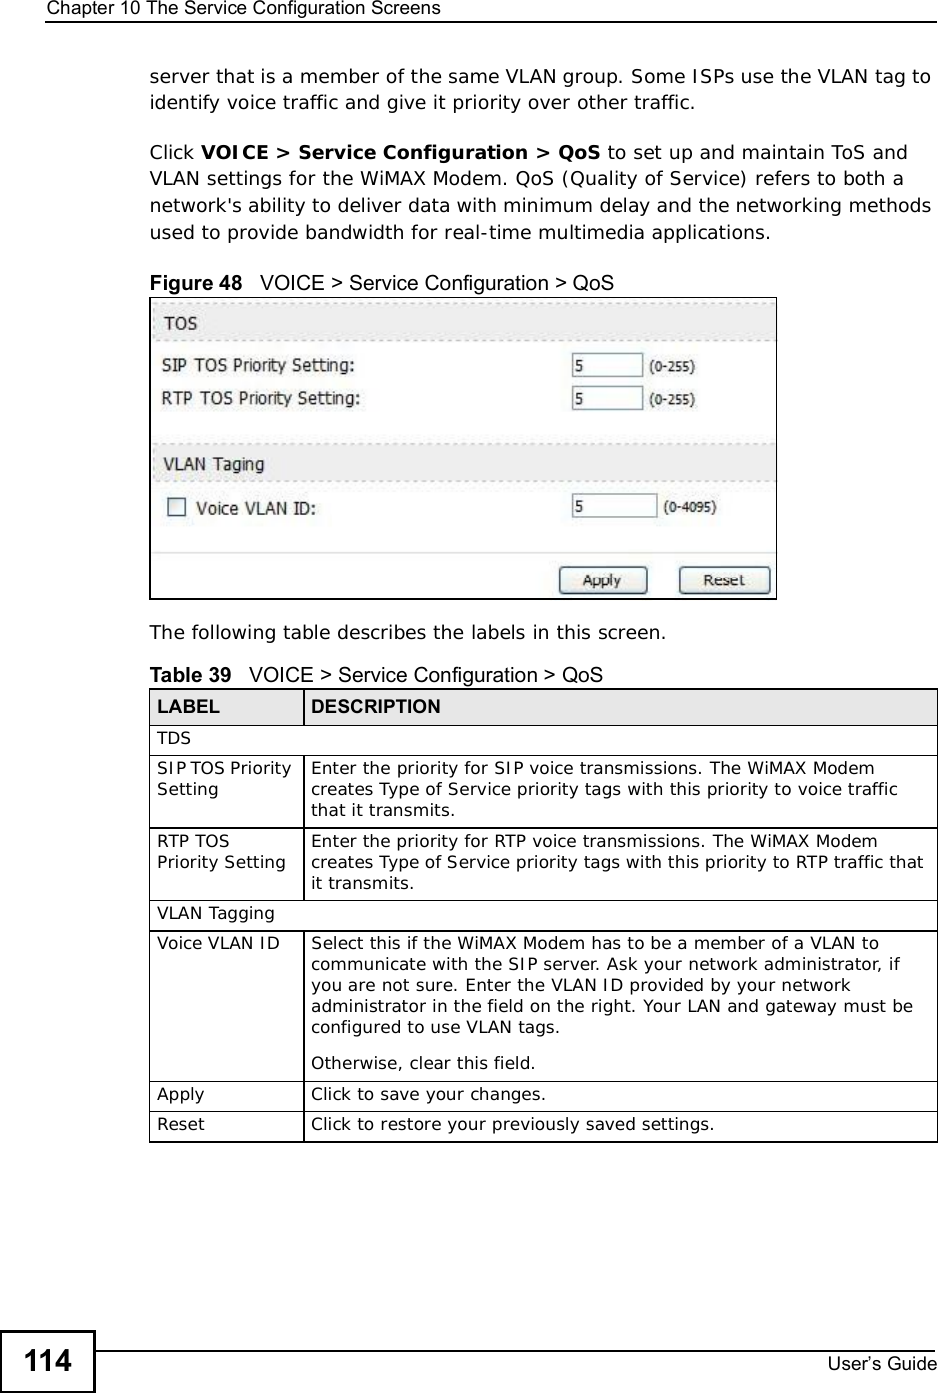 Chapter 10The Service Configuration ScreensUser s Guide114server that is a member of the same VLAN group. Some ISPs use the VLAN tag to identify voice traffic and give it priority over other traffic.Click VOICE &gt; Service Configuration &gt; QoS to set up and maintain ToS and VLAN settings for the WiMAX Modem. QoS (Quality of Service) refers to both a network&apos;s ability to deliver data with minimum delay and the networking methods used to provide bandwidth for real-time multimedia applications.Figure 48   VOICE &gt; Service Configuration &gt; QoSThe following table describes the labels in this screen.Table 39   VOICE &gt; Service Configuration &gt; QoSLABEL DESCRIPTIONTDSSIP TOS Priority Setting Enter the priority for SIP voice transmissions. The WiMAX Modem creates Type of Service priority tags with this priority to voice traffic that it transmits.RTP TOS Priority Setting Enter the priority for RTP voice transmissions. The WiMAX Modem creates Type of Service priority tags with this priority to RTP traffic that it transmits.VLAN TaggingVoice VLAN IDSelect this if the WiMAX Modem has to be a member of a VLAN to communicate with the SIP server. Ask your network administrator, if you are not sure. Enter the VLAN ID provided by your network administrator in the field on the right. Your LAN and gateway must be configured to use VLAN tags.Otherwise, clear this field.Apply Click to save your changes.Reset Click to restore your previously saved settings.